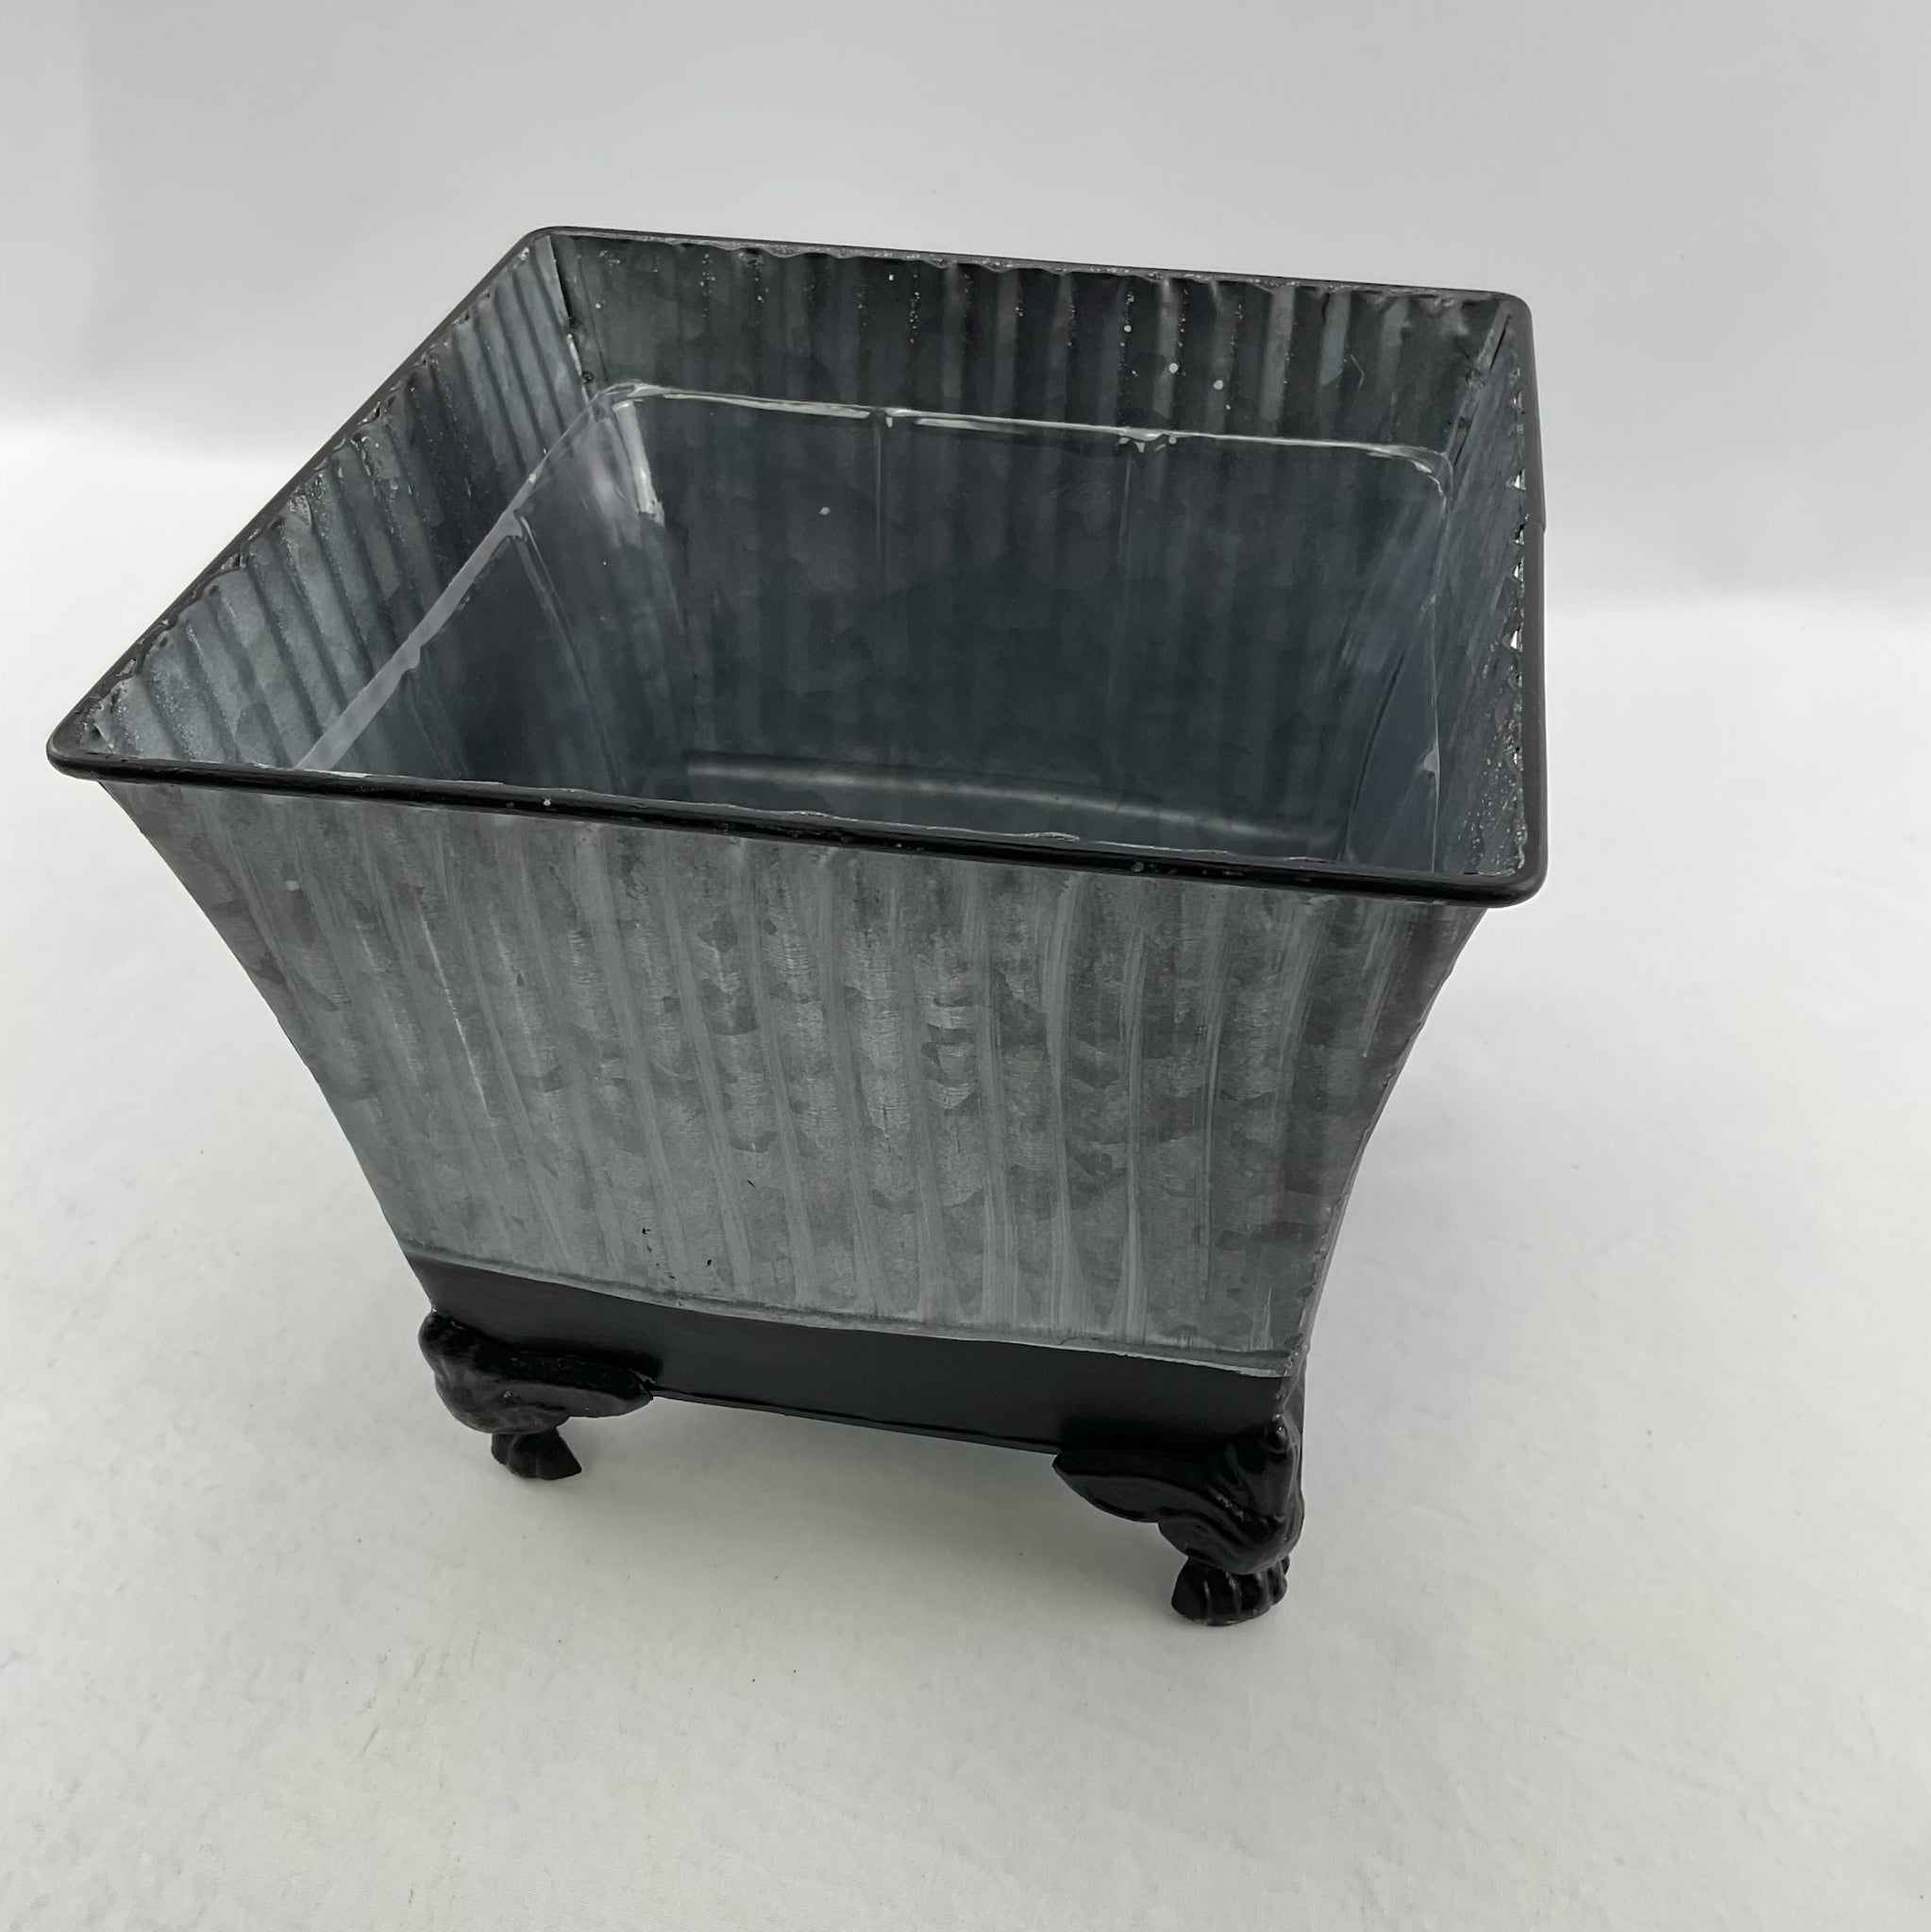 Metal container with legs for floral designs - medium size - Greenery MarketVases170wb-m